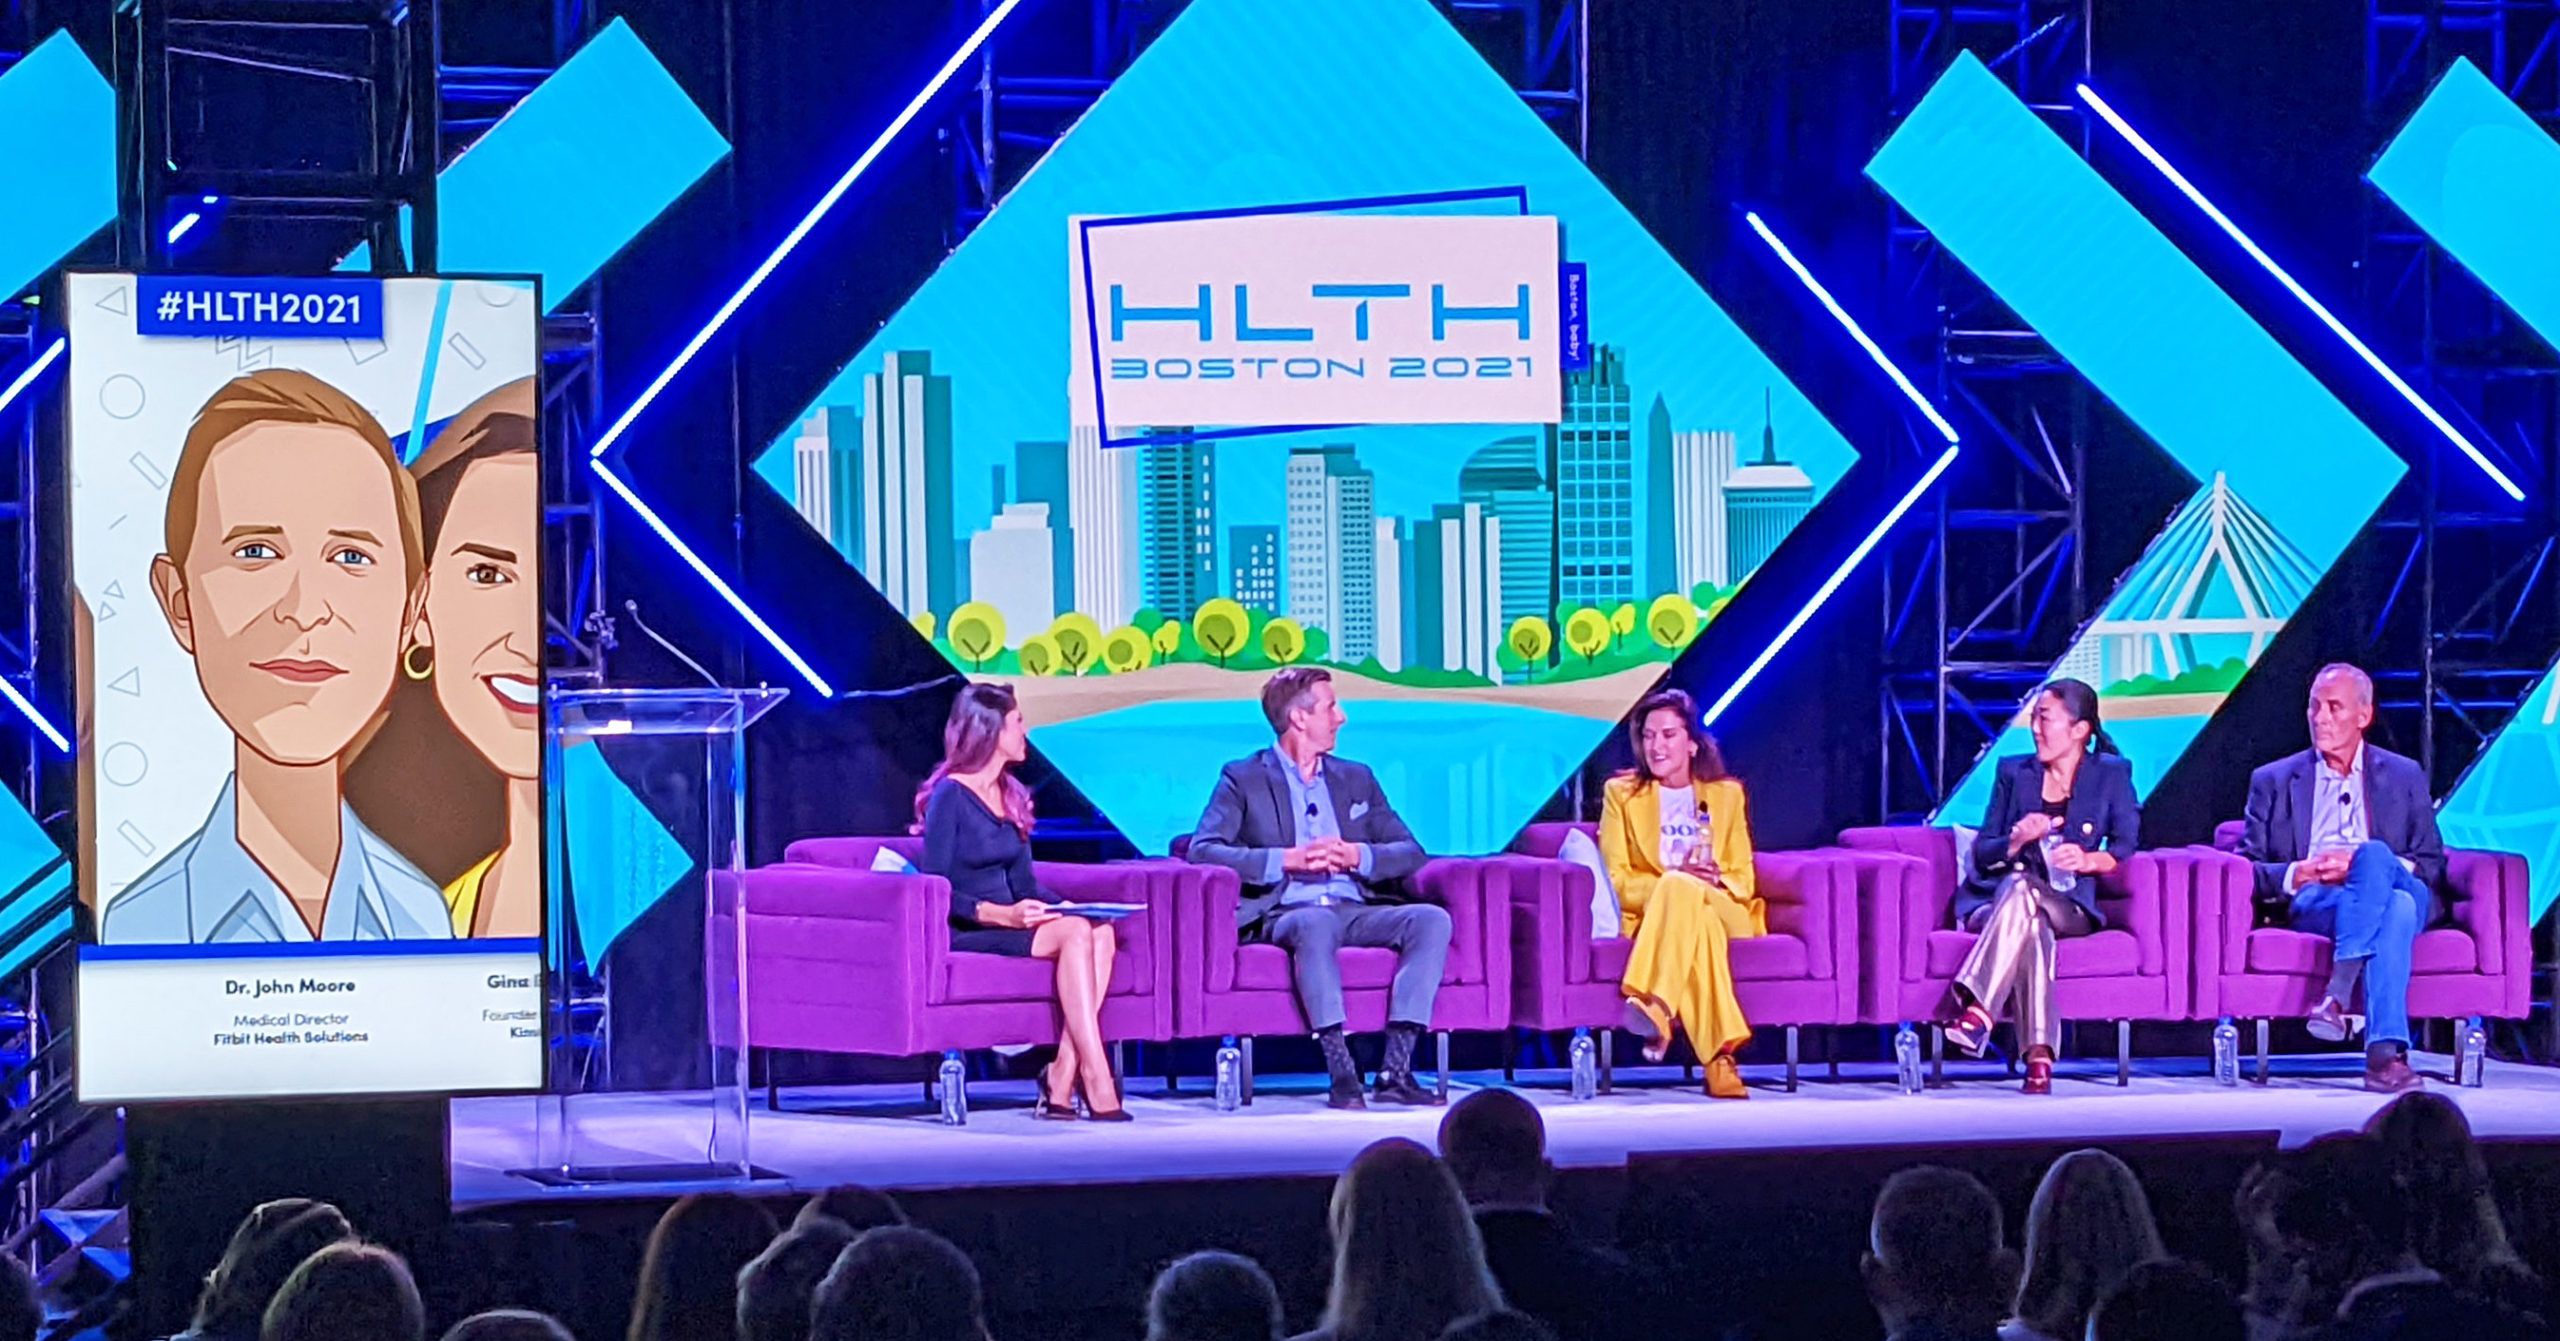 HLTH 2021 Recap: 5 Key Takeaways from the Largest Conference for Health Innovation